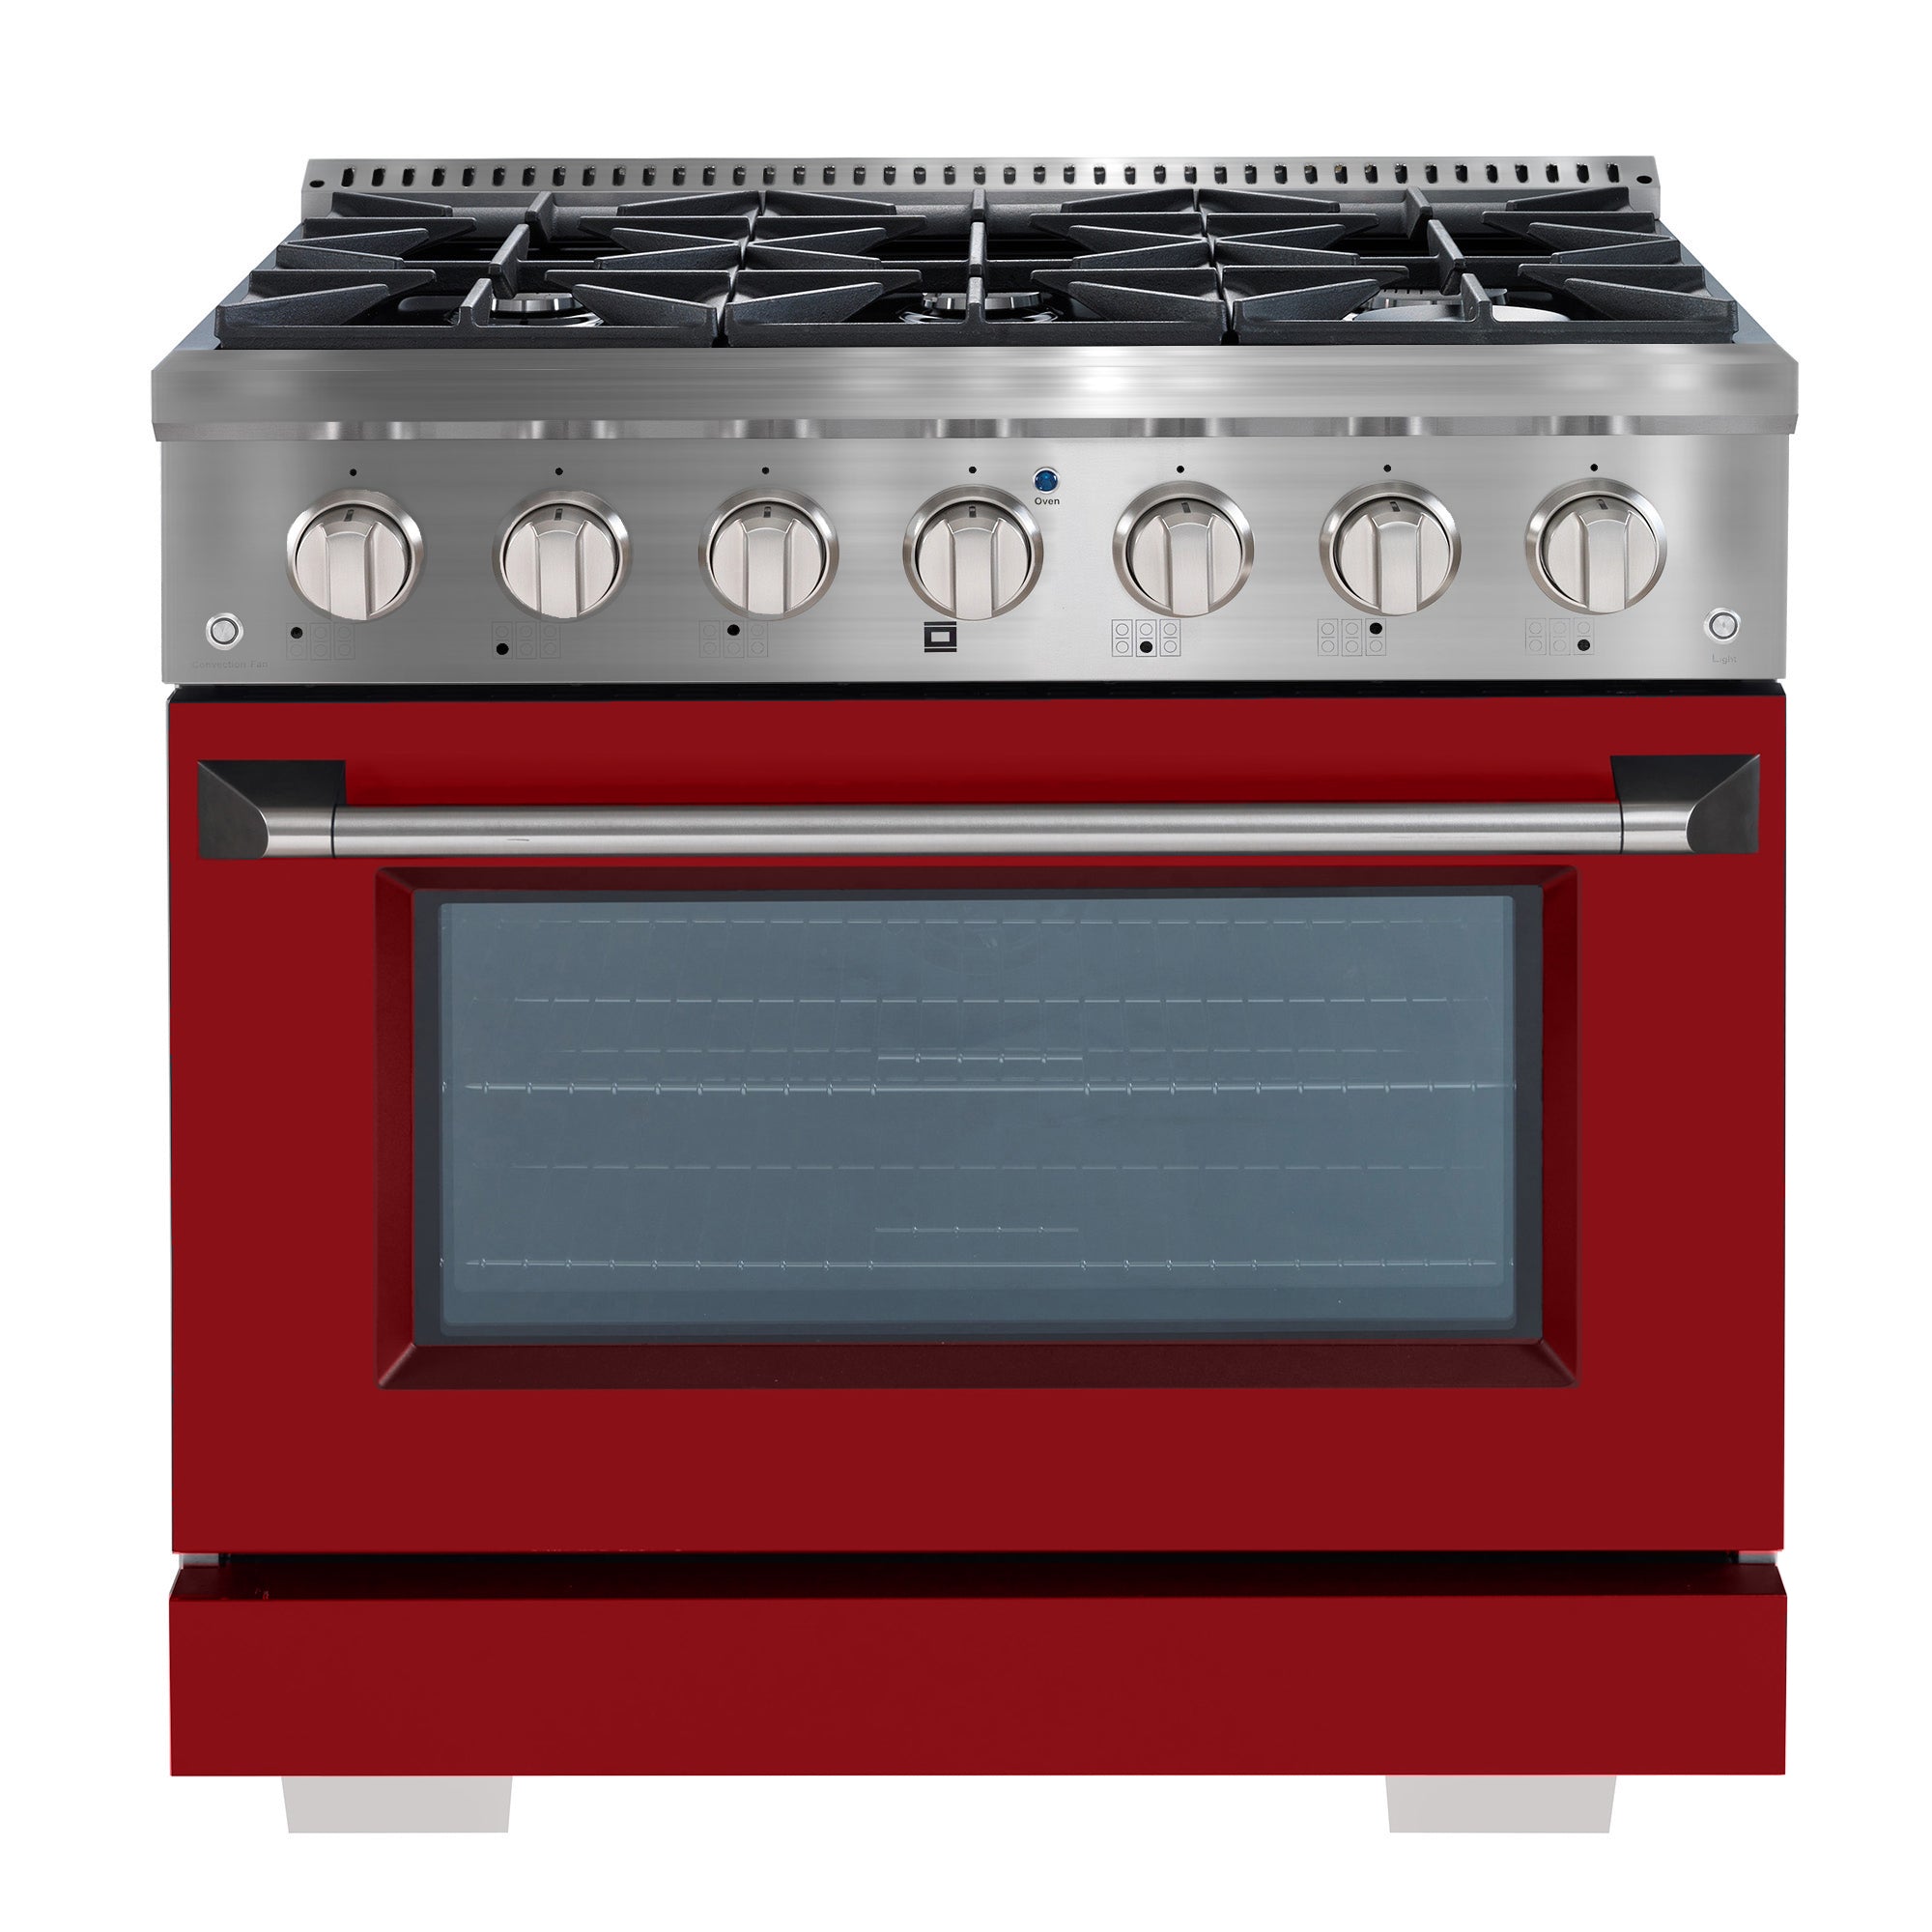 Ancona 36” 5.2 cu. ft. Gas Range with 6 Burners and Convection Oven in Stainless Steel with Red Door